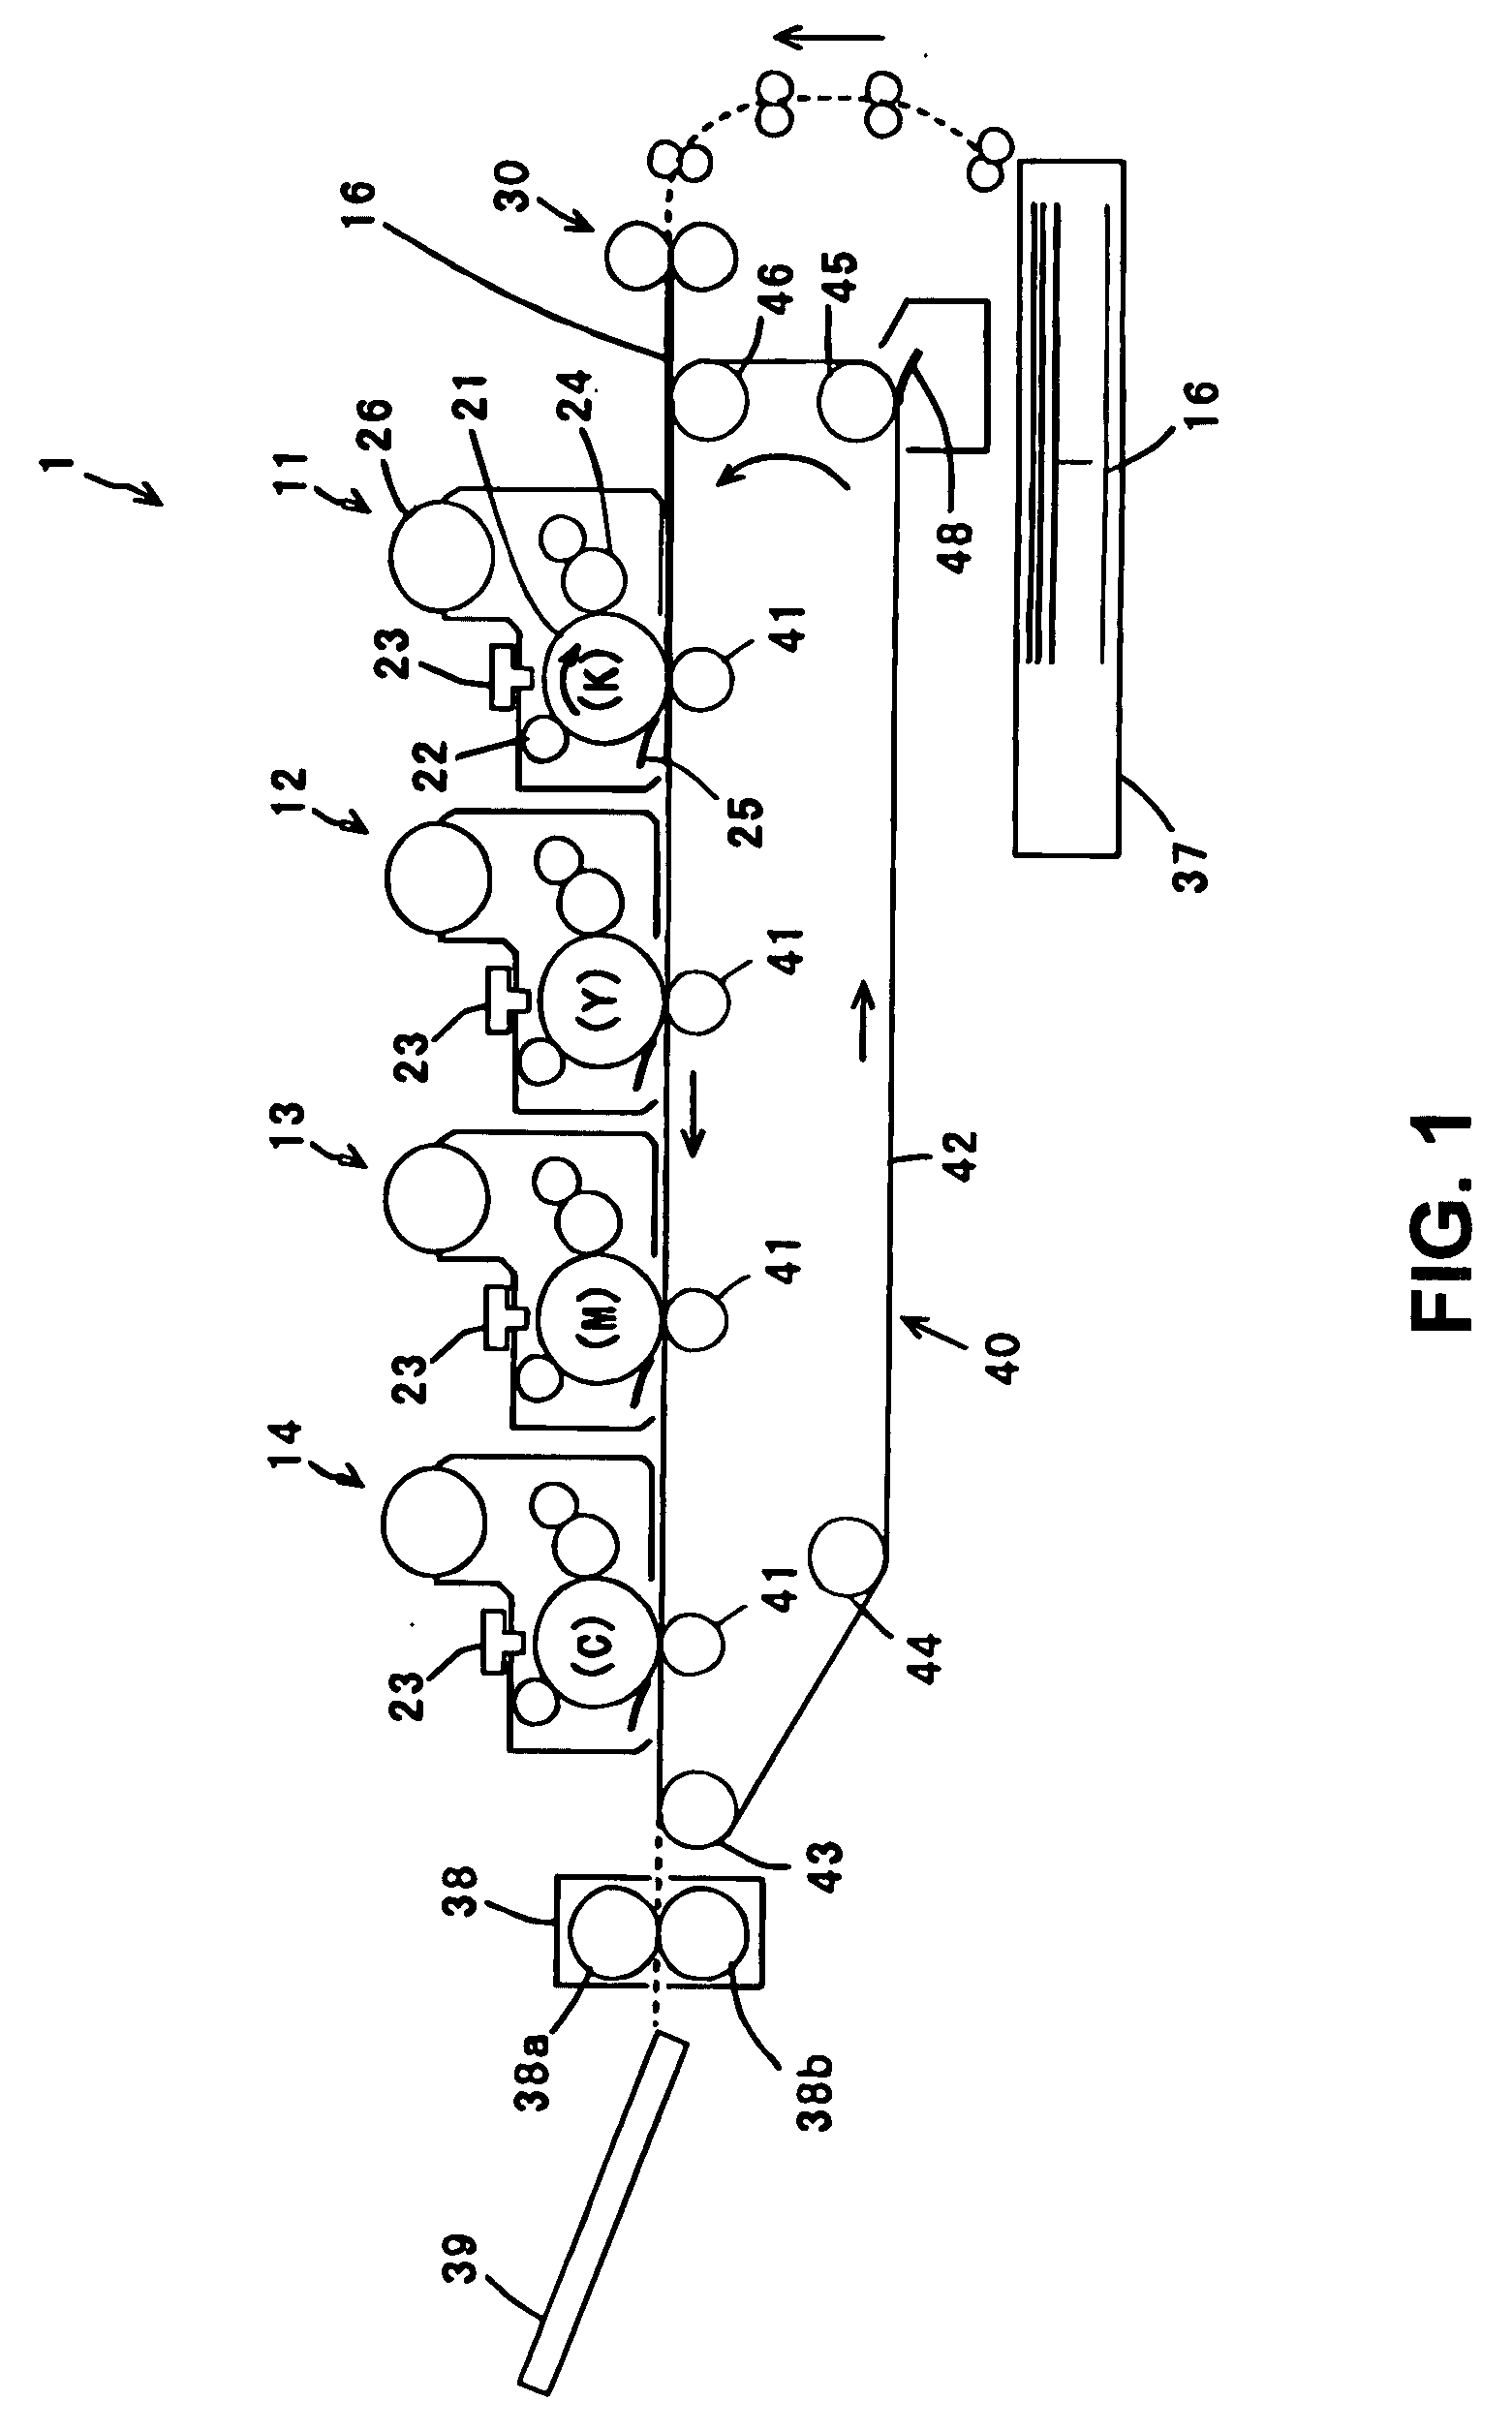 Conductive foamed roller, method of producing the same, and image forming apparatus